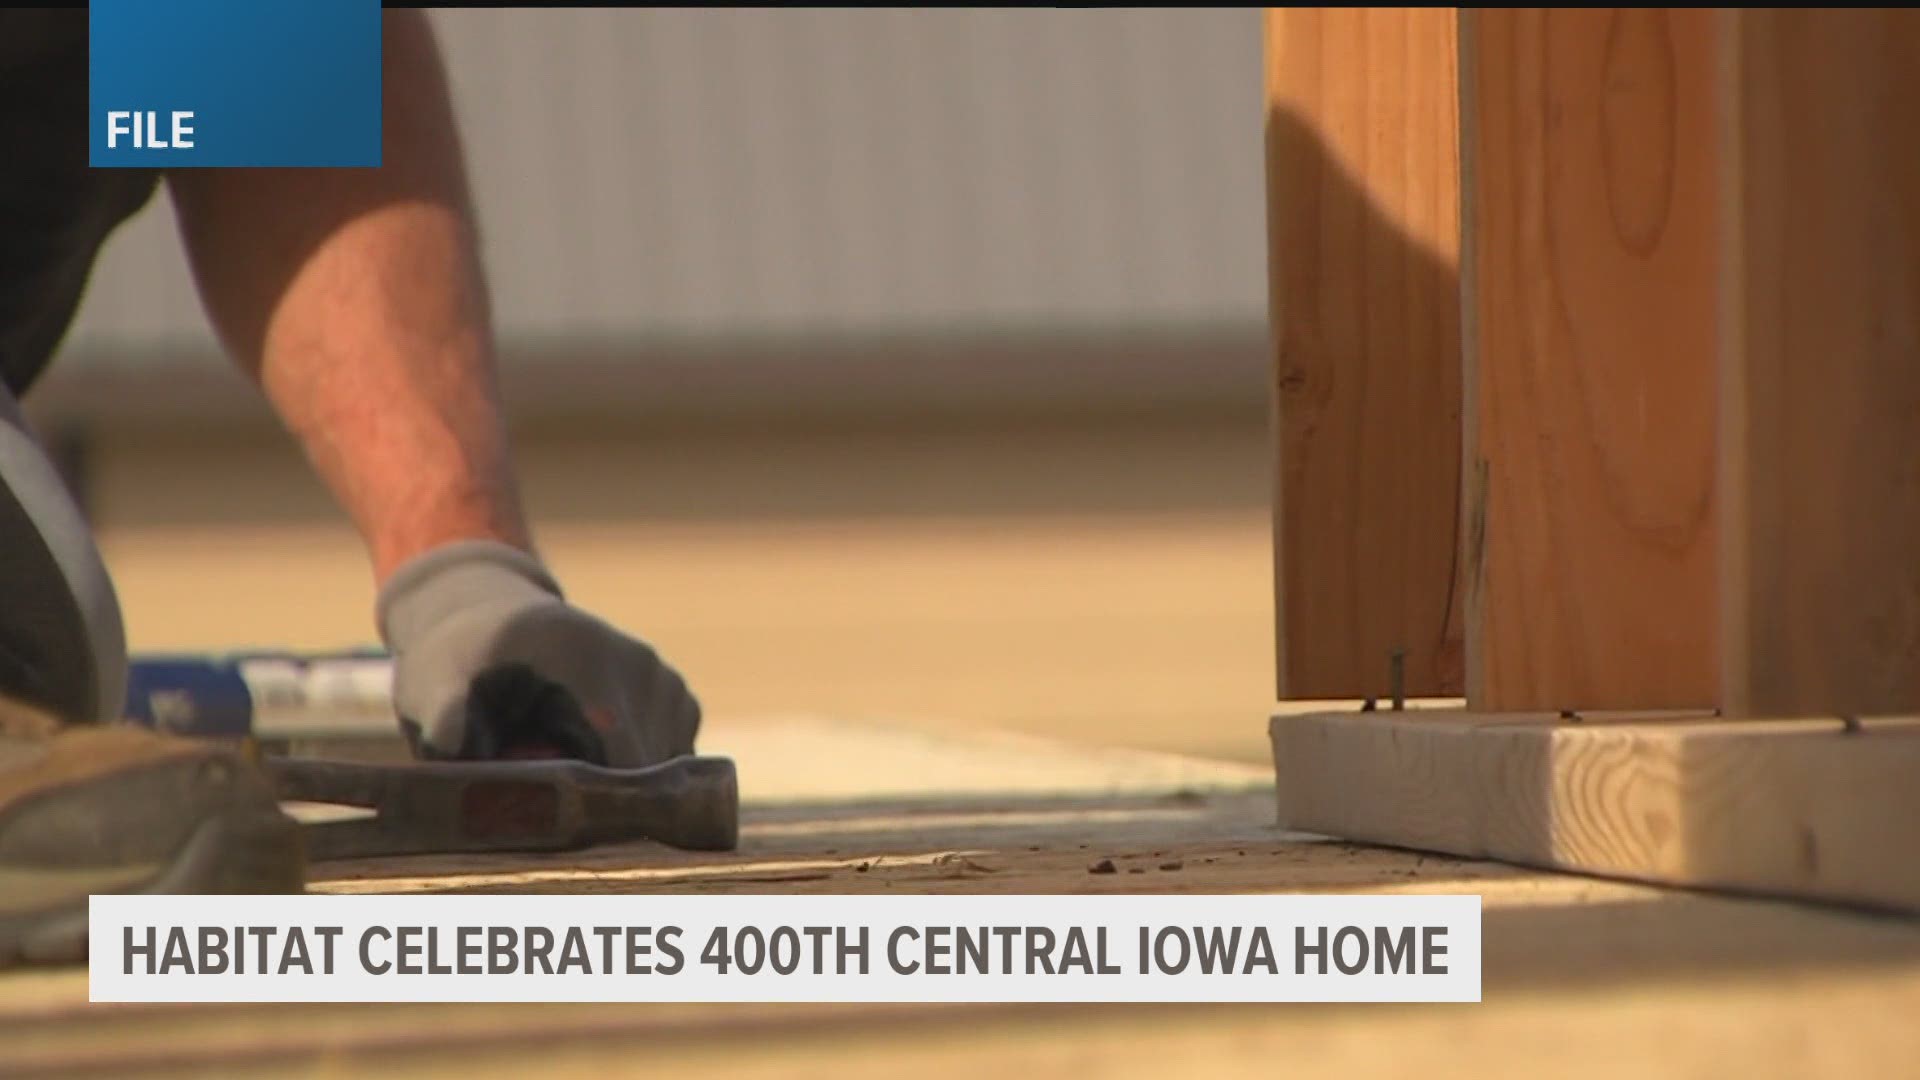 The Greater Des Moines Habitat for Humanity dedicated their 400th home to a family of four.